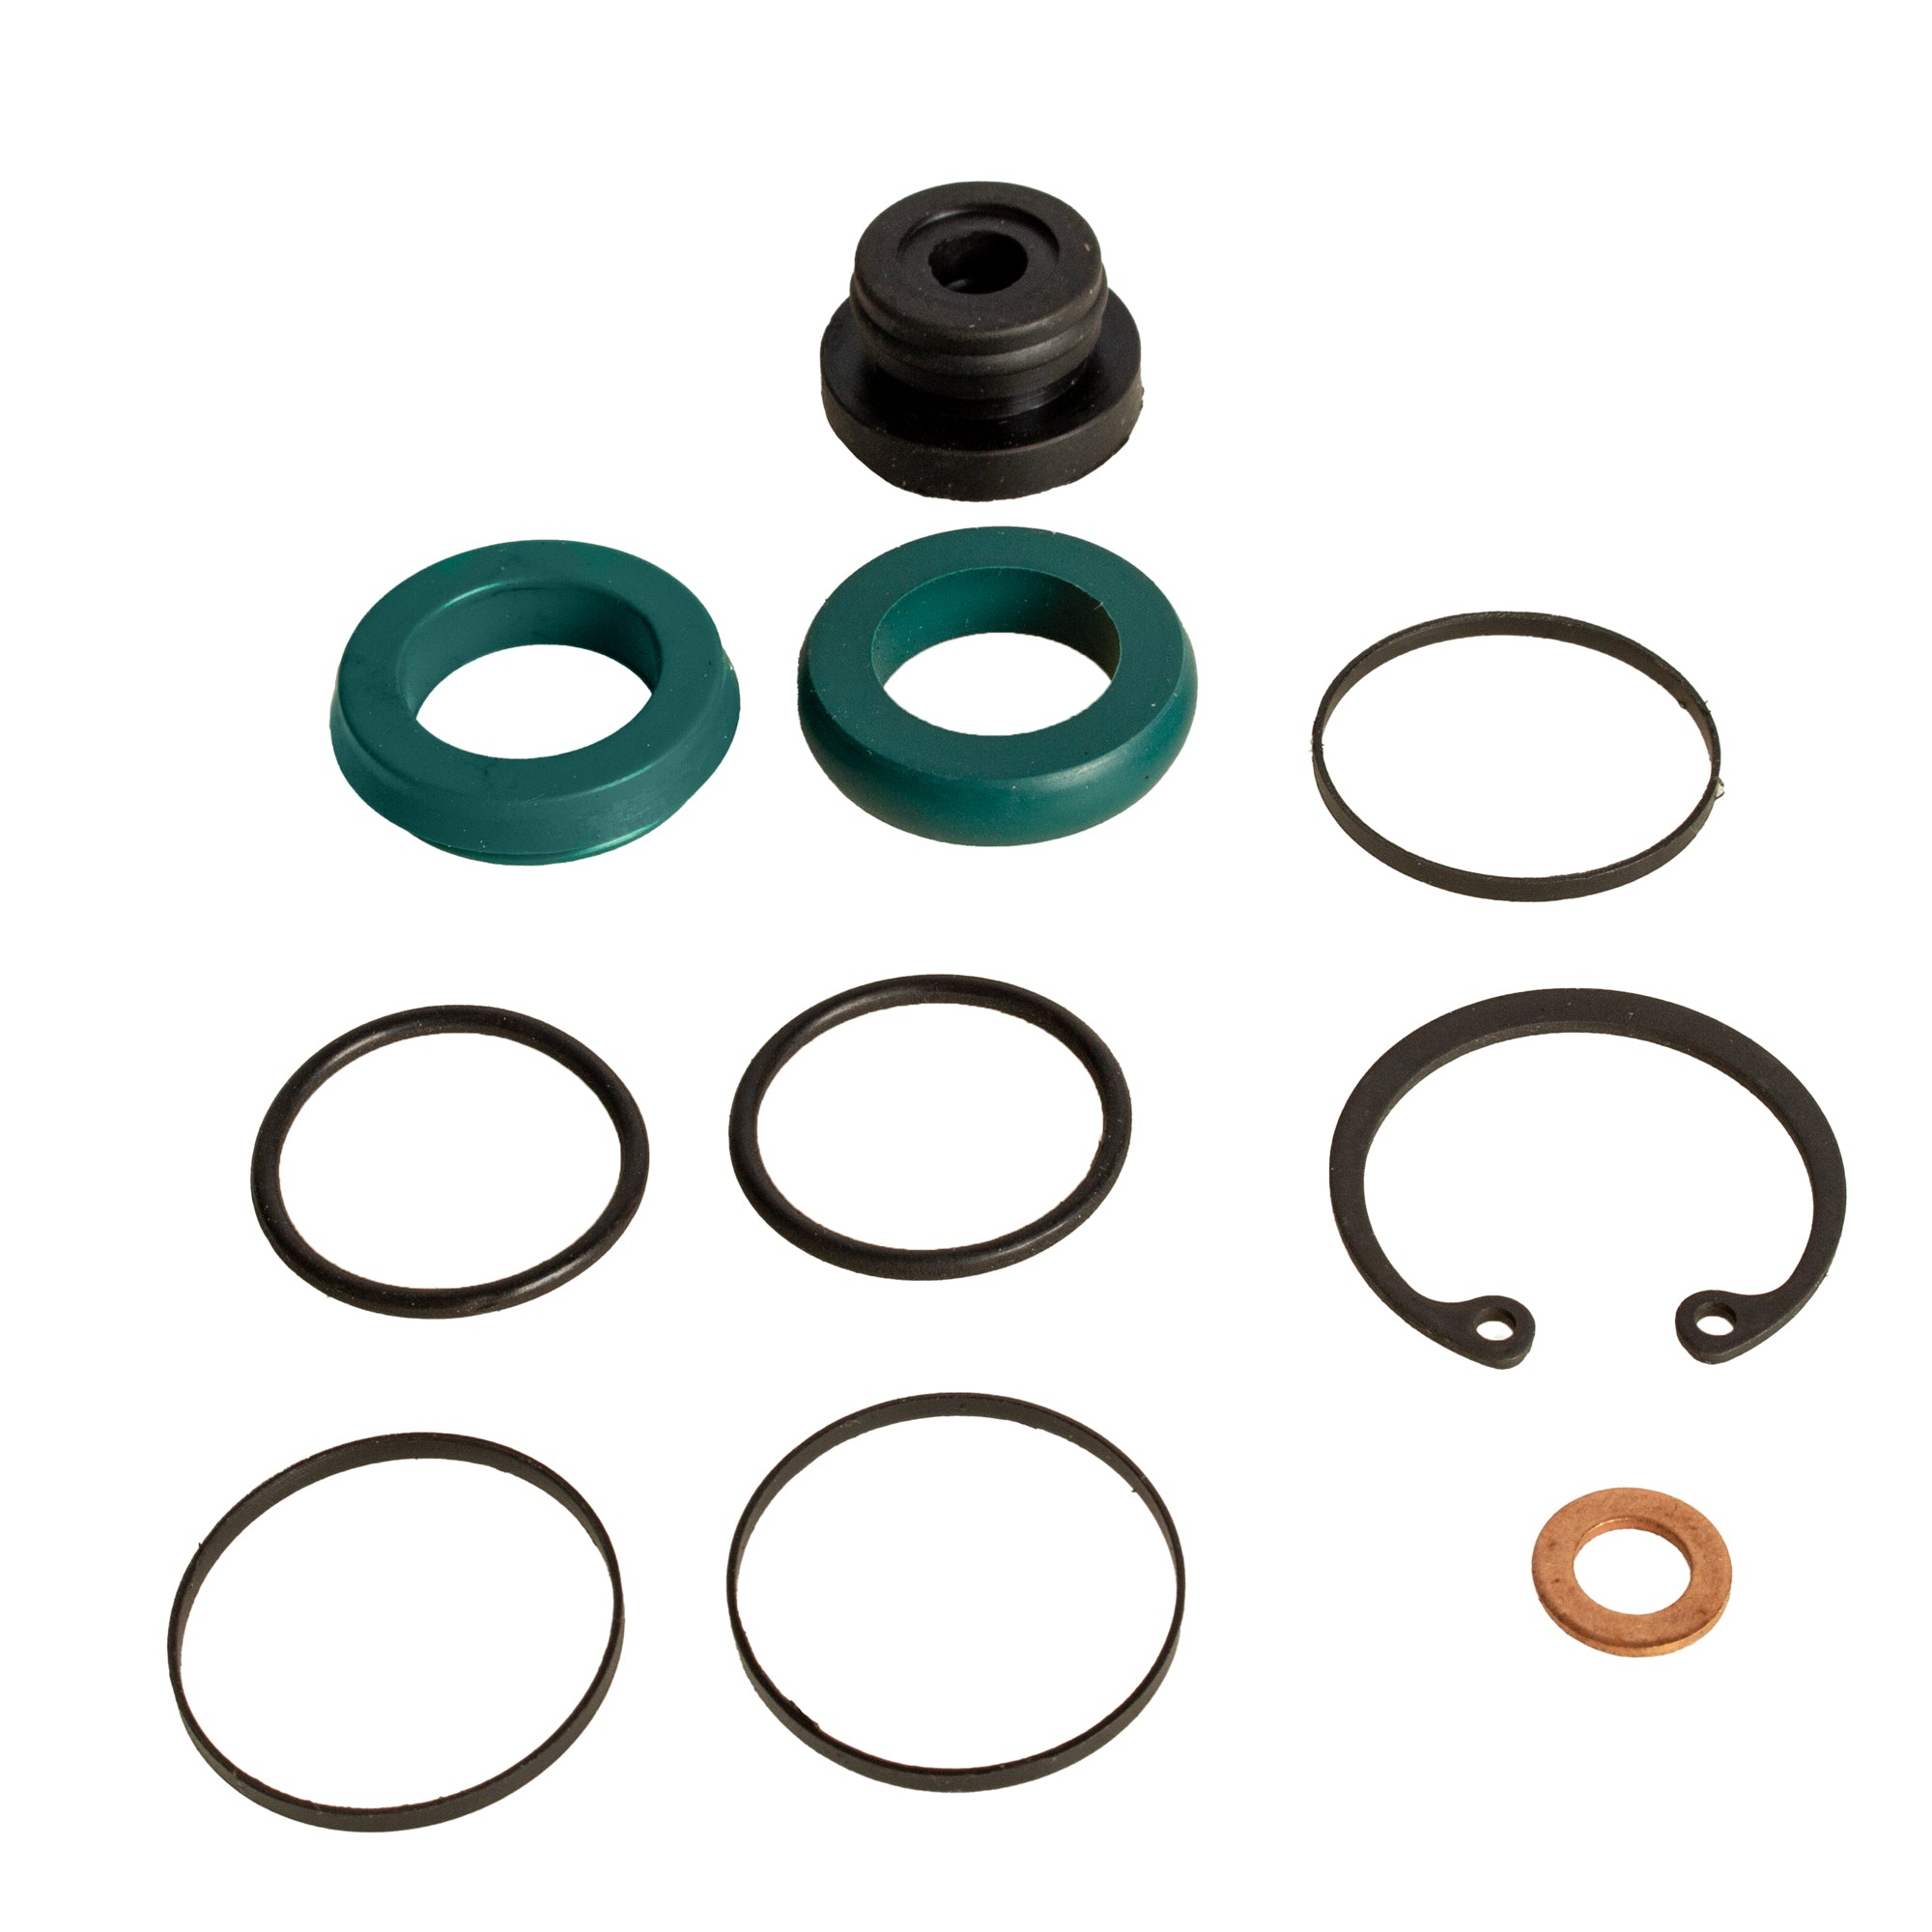 Brake Master Cylinder Repair Kit Replacement for FORD NEW HOLLAND 35 60 87343615